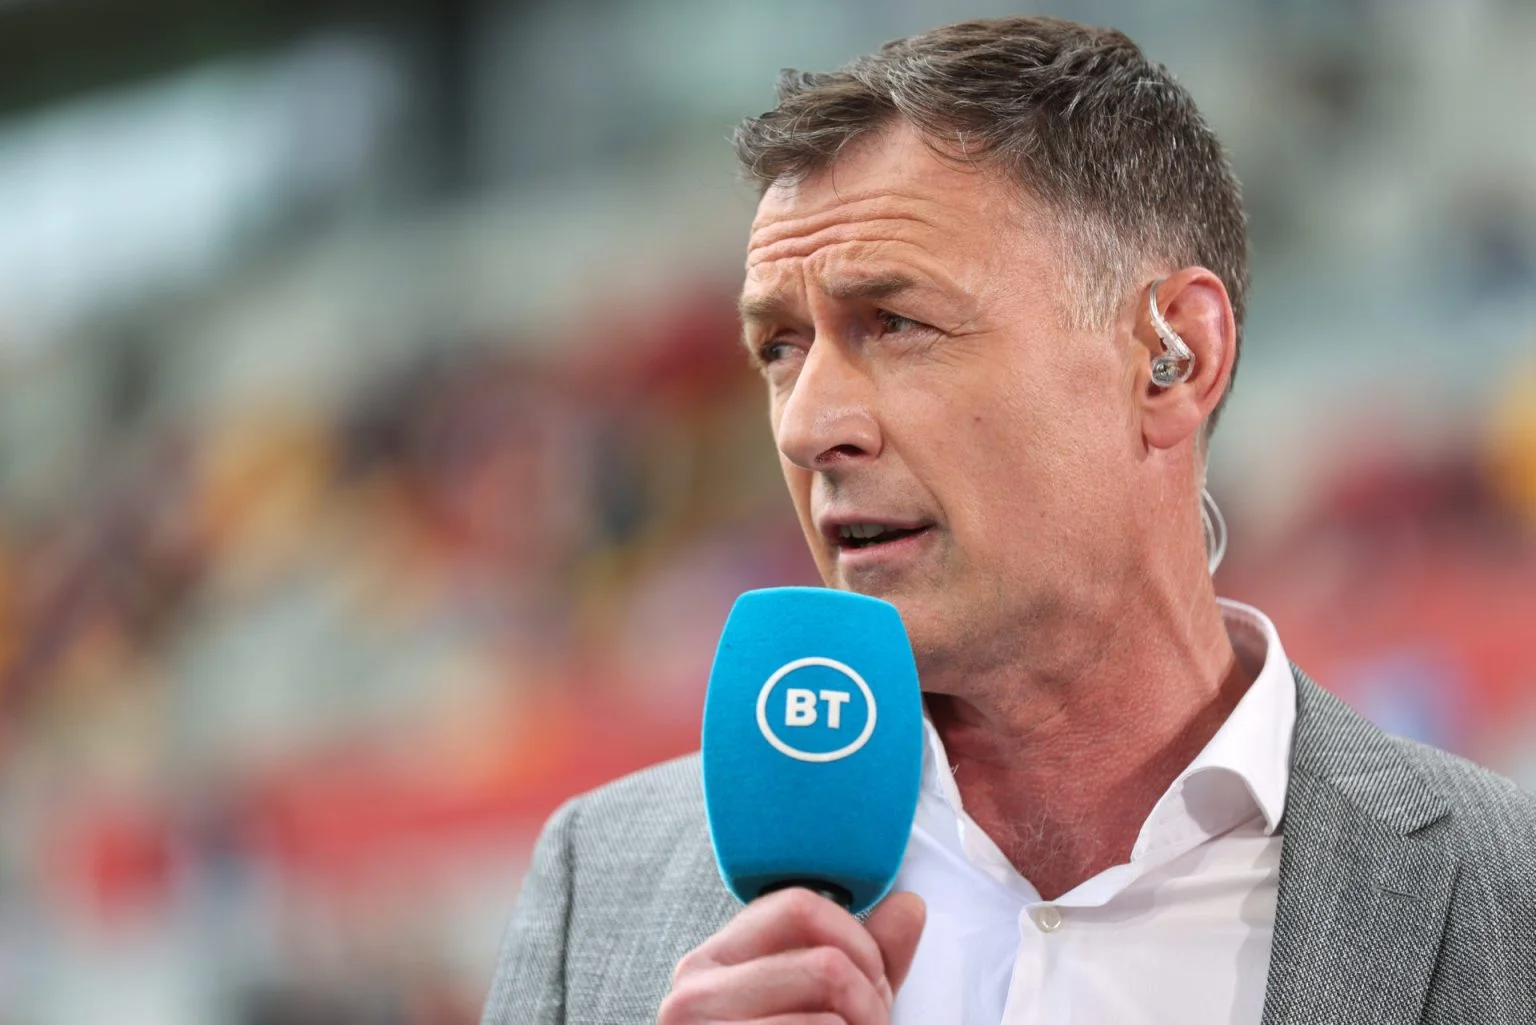 EPL: They made huge mistake signing him – Chris Sutton on Man Utd star